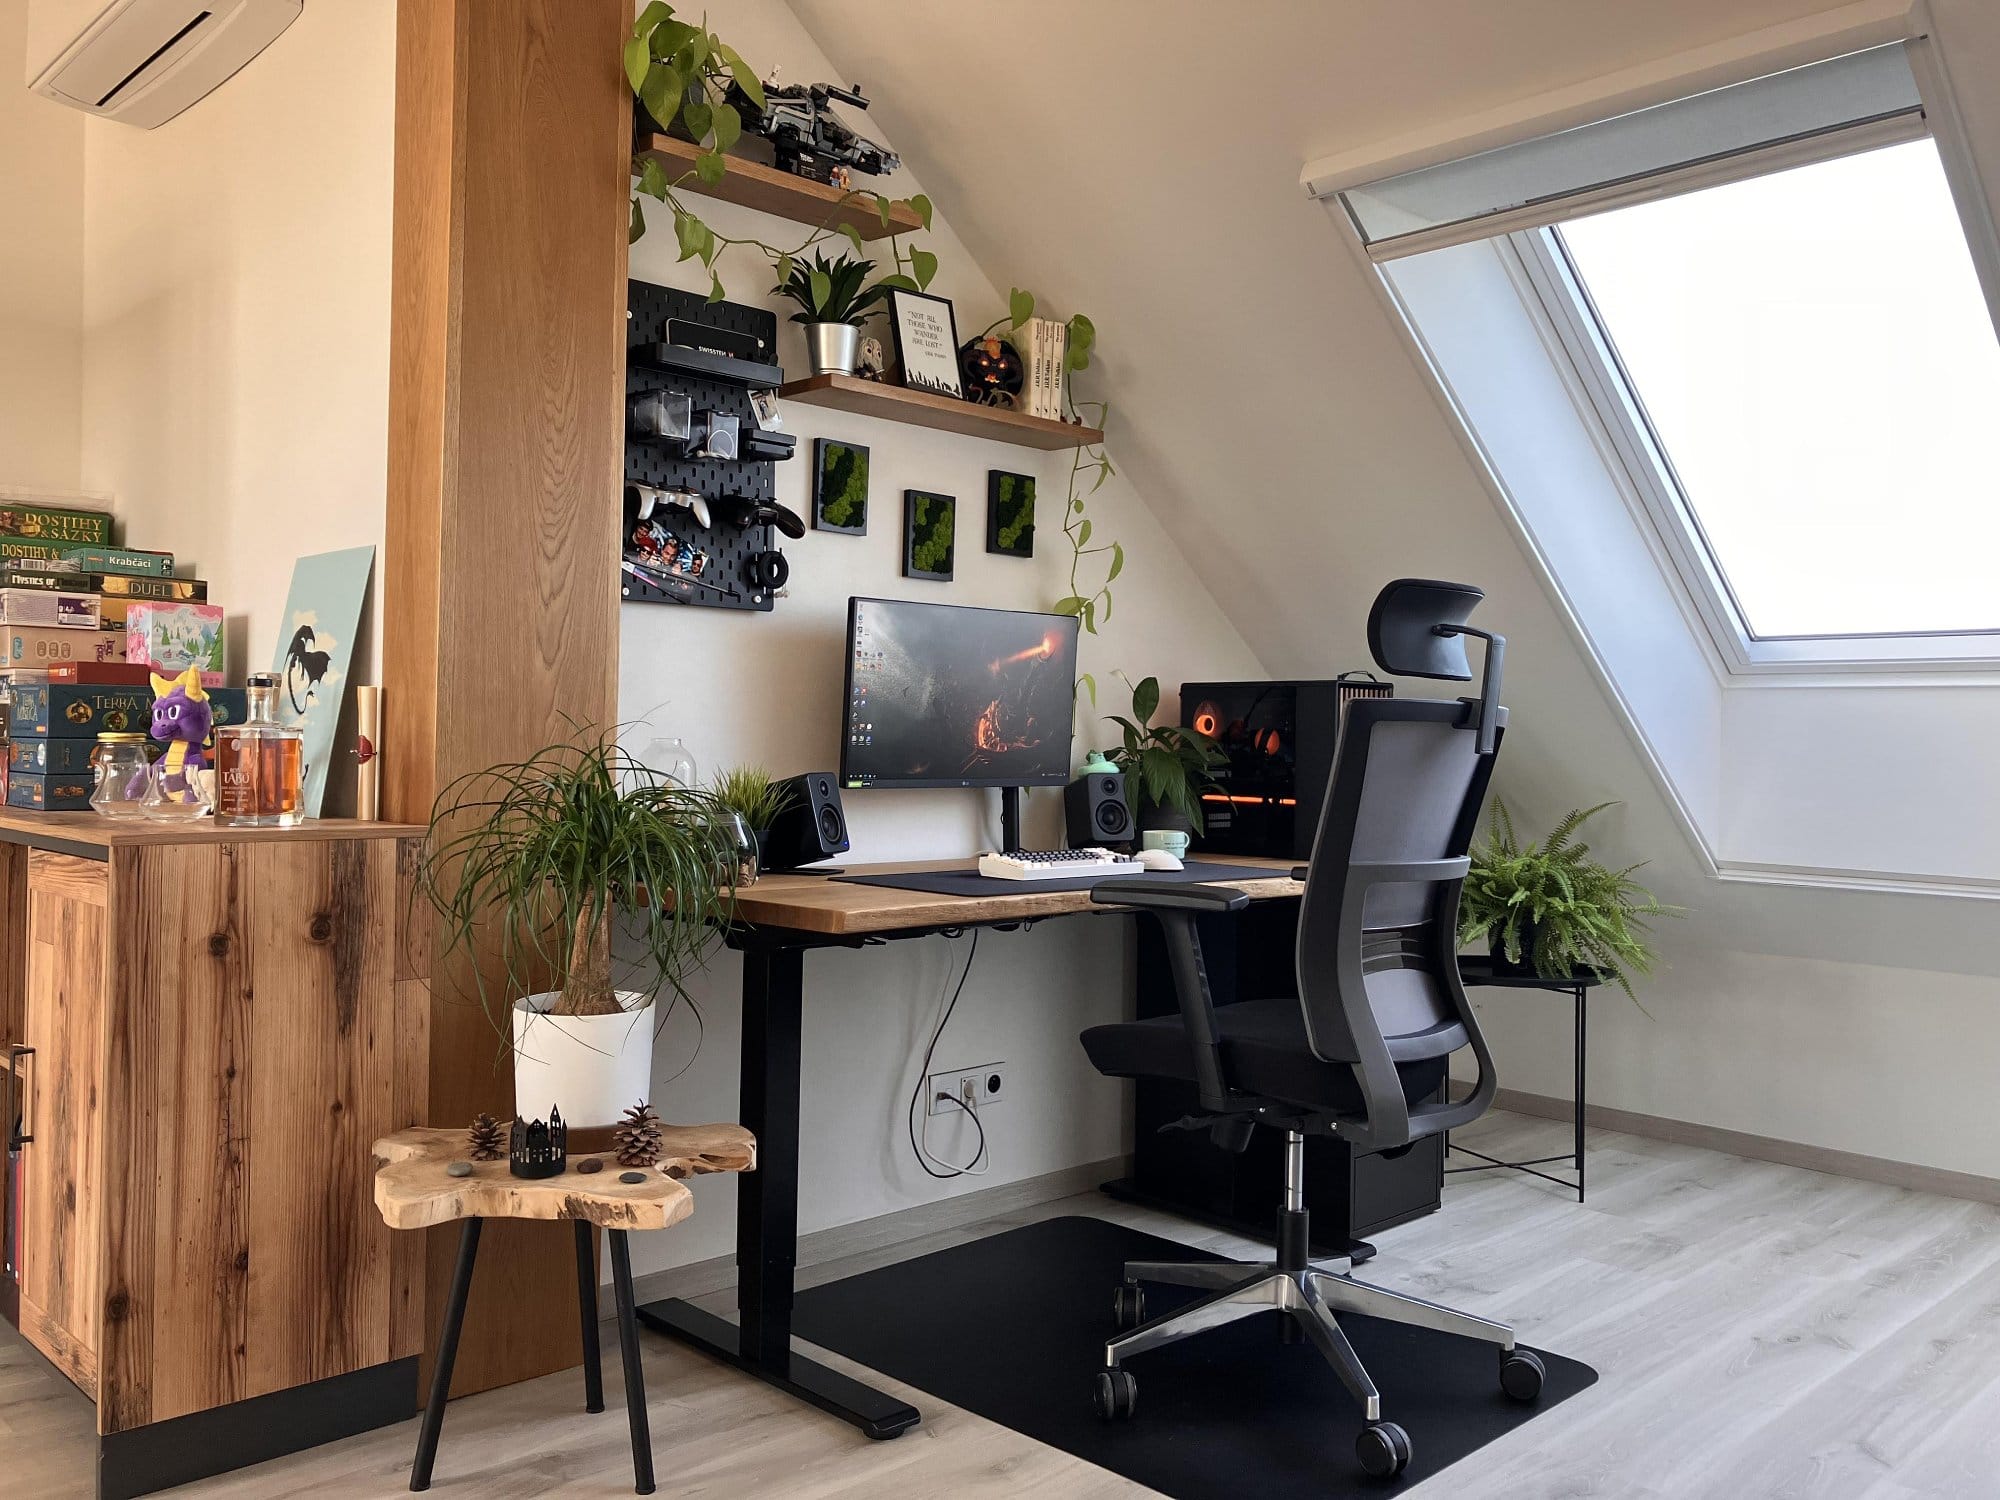 A stylish home office with a wooden desk, ergonomic chair, computer setup, and multiple plants